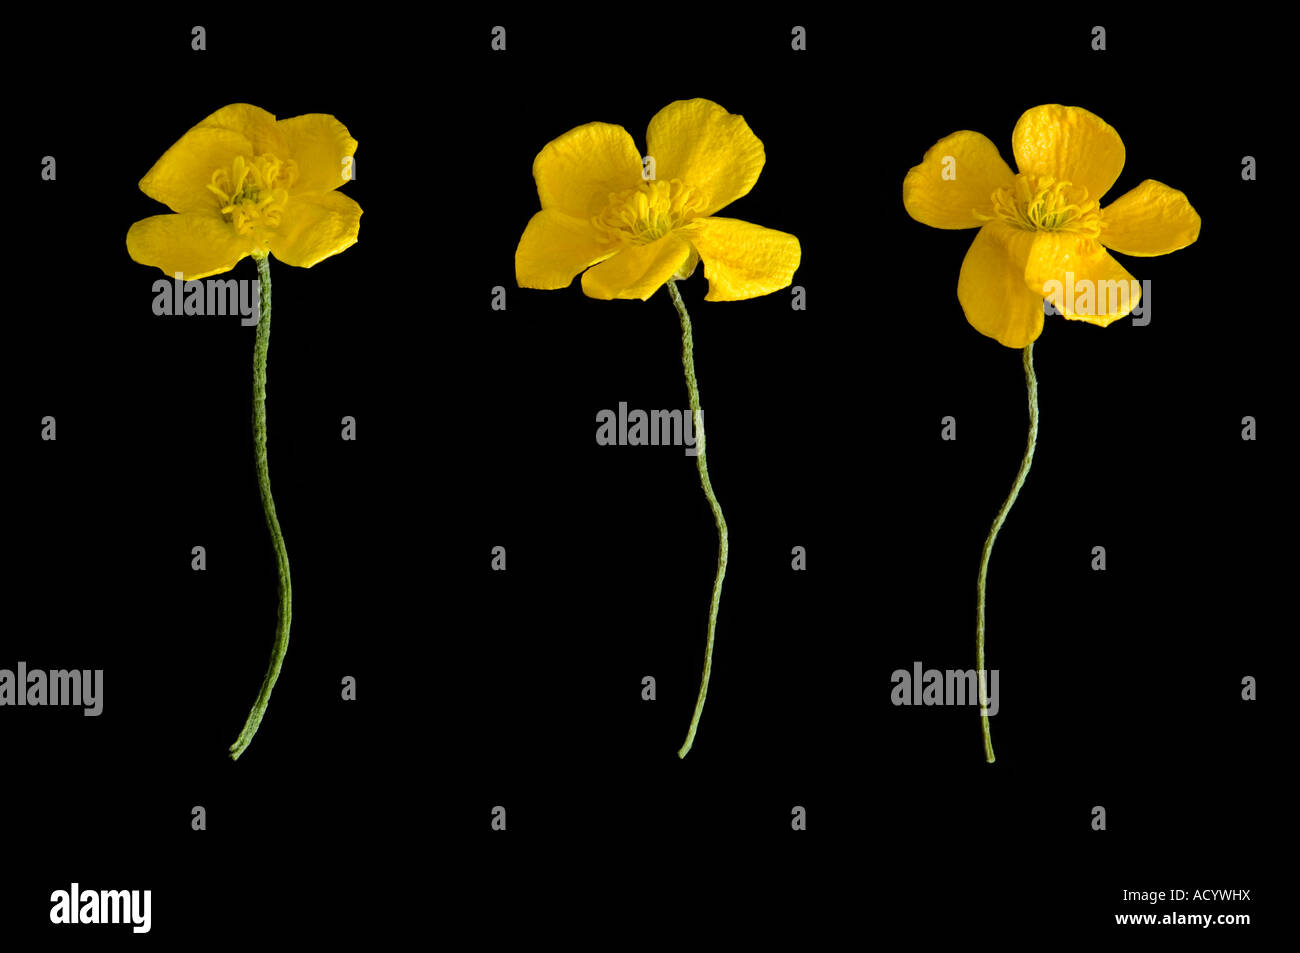 row of 3 buttercups Buttercup Ranunculus occidentalis Stock Photo